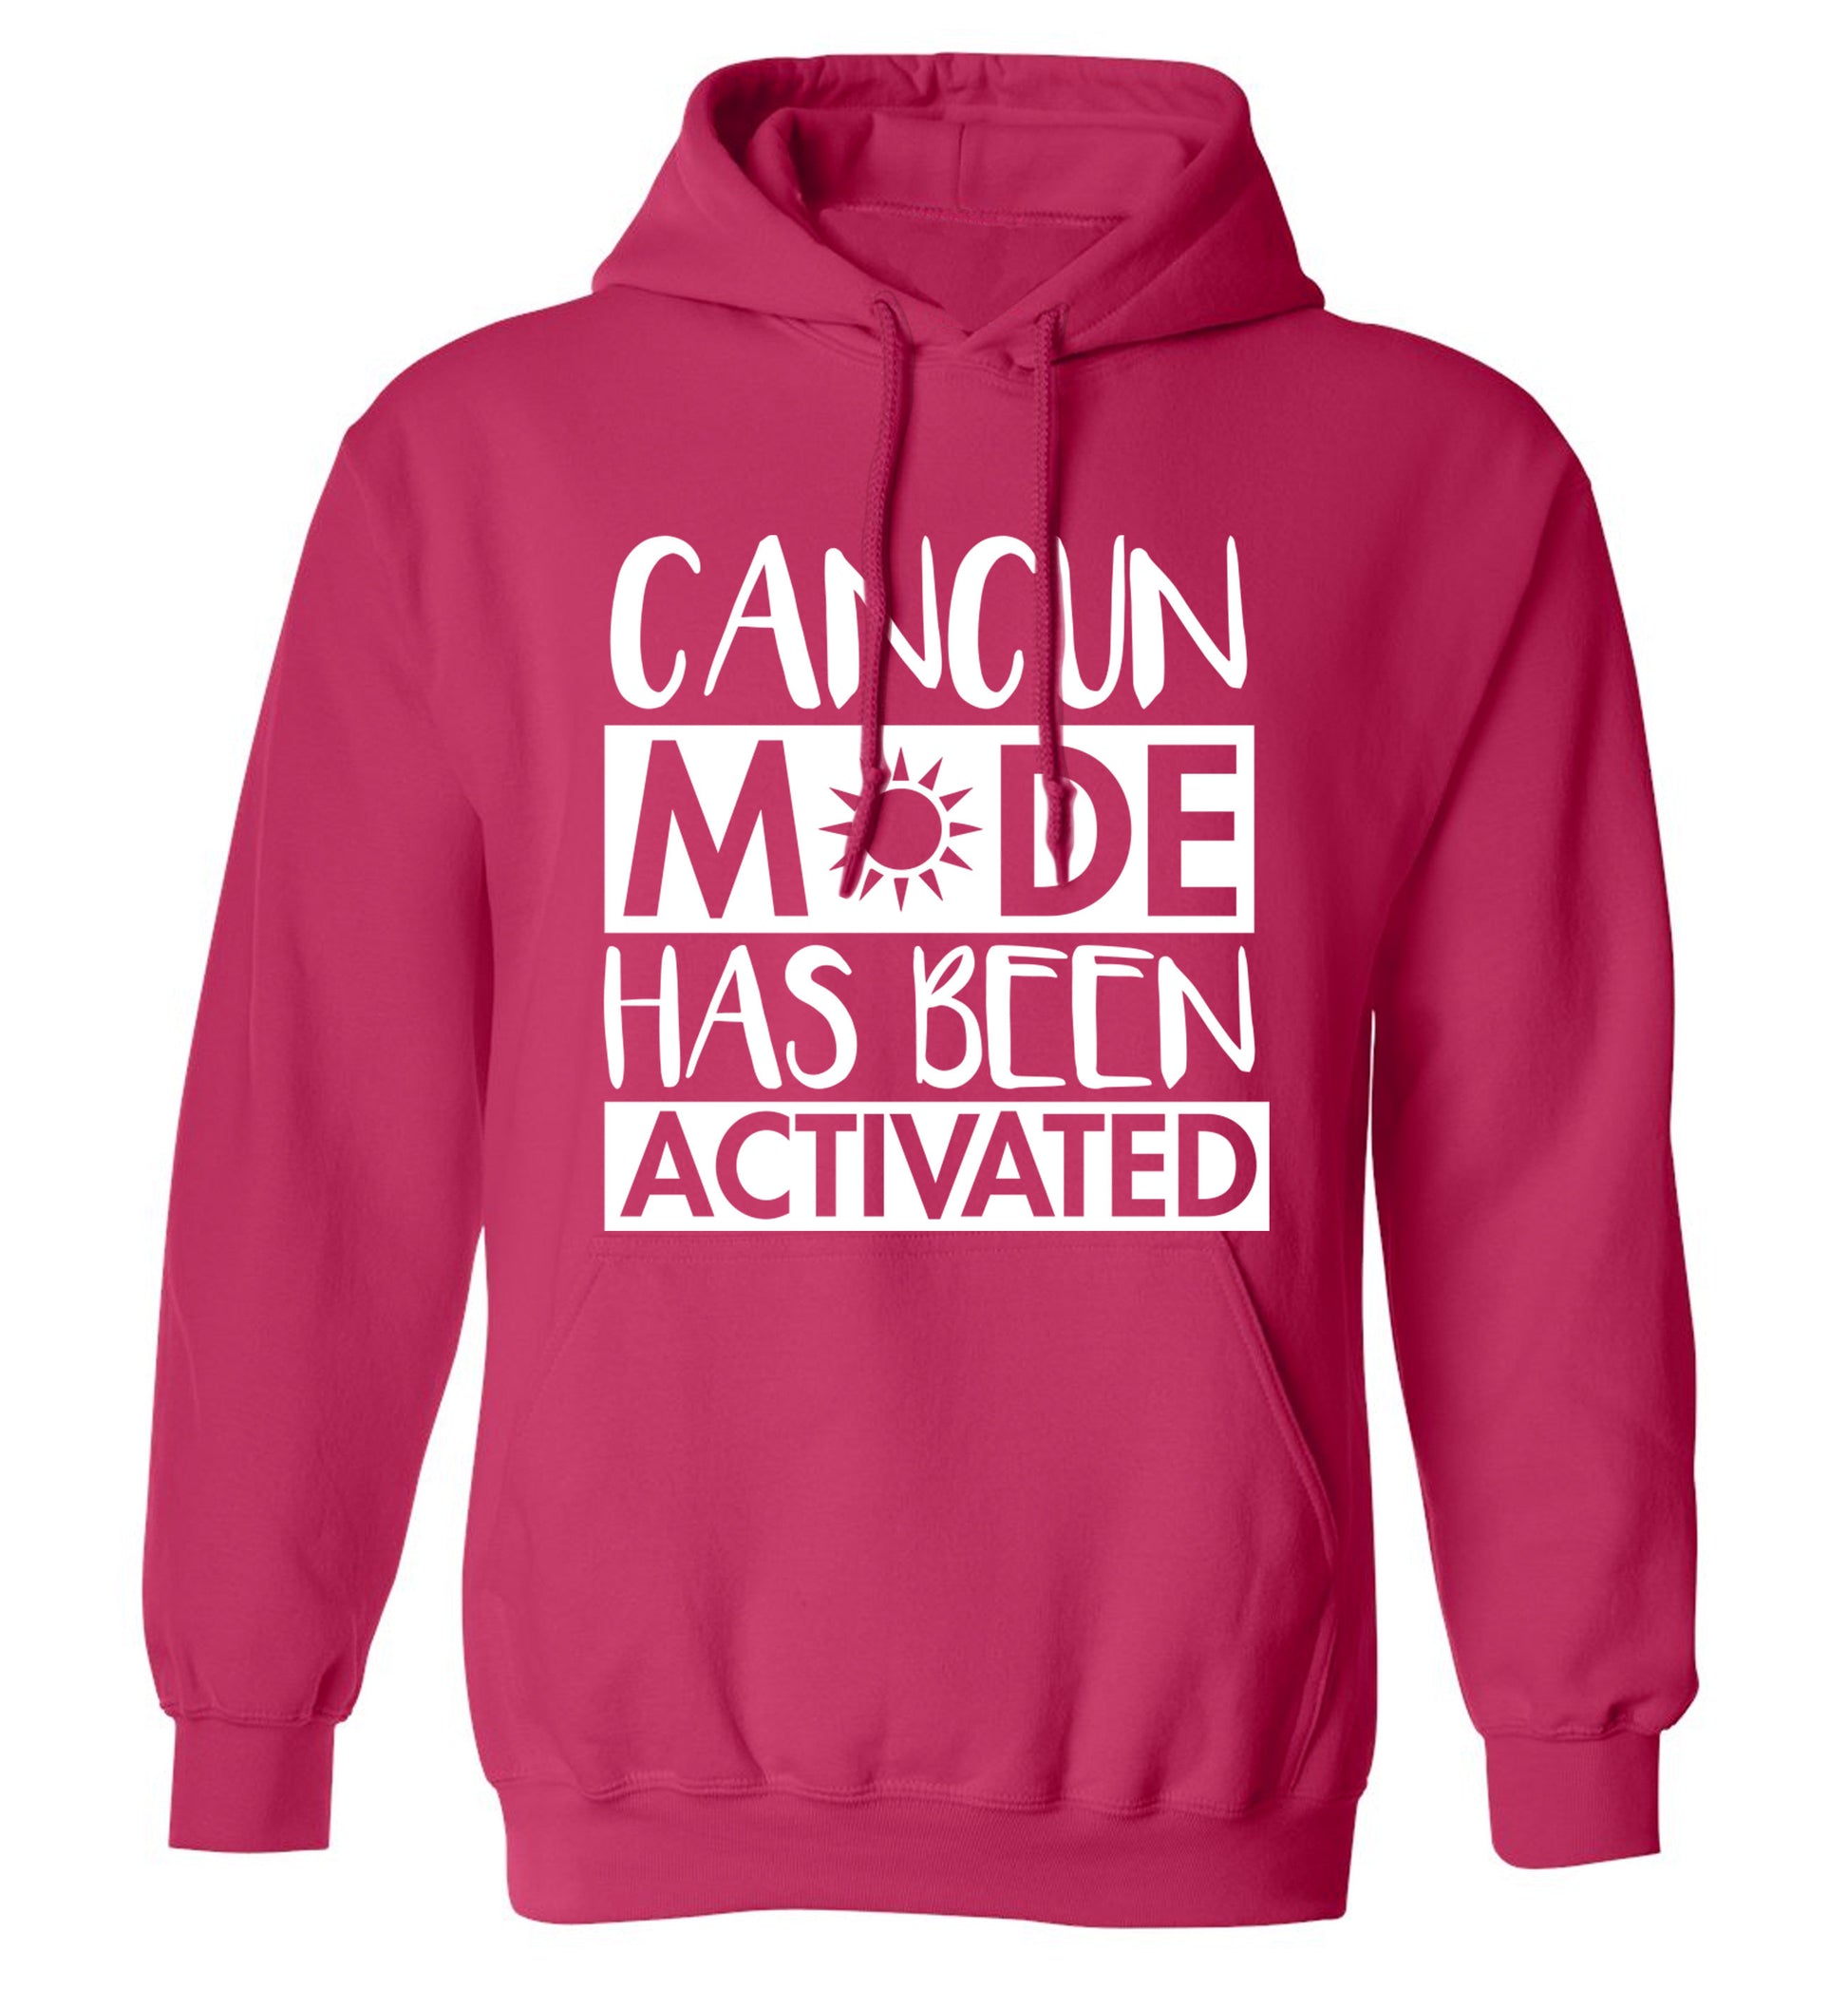 Cancun mode has been activated adults unisex pink hoodie 2XL